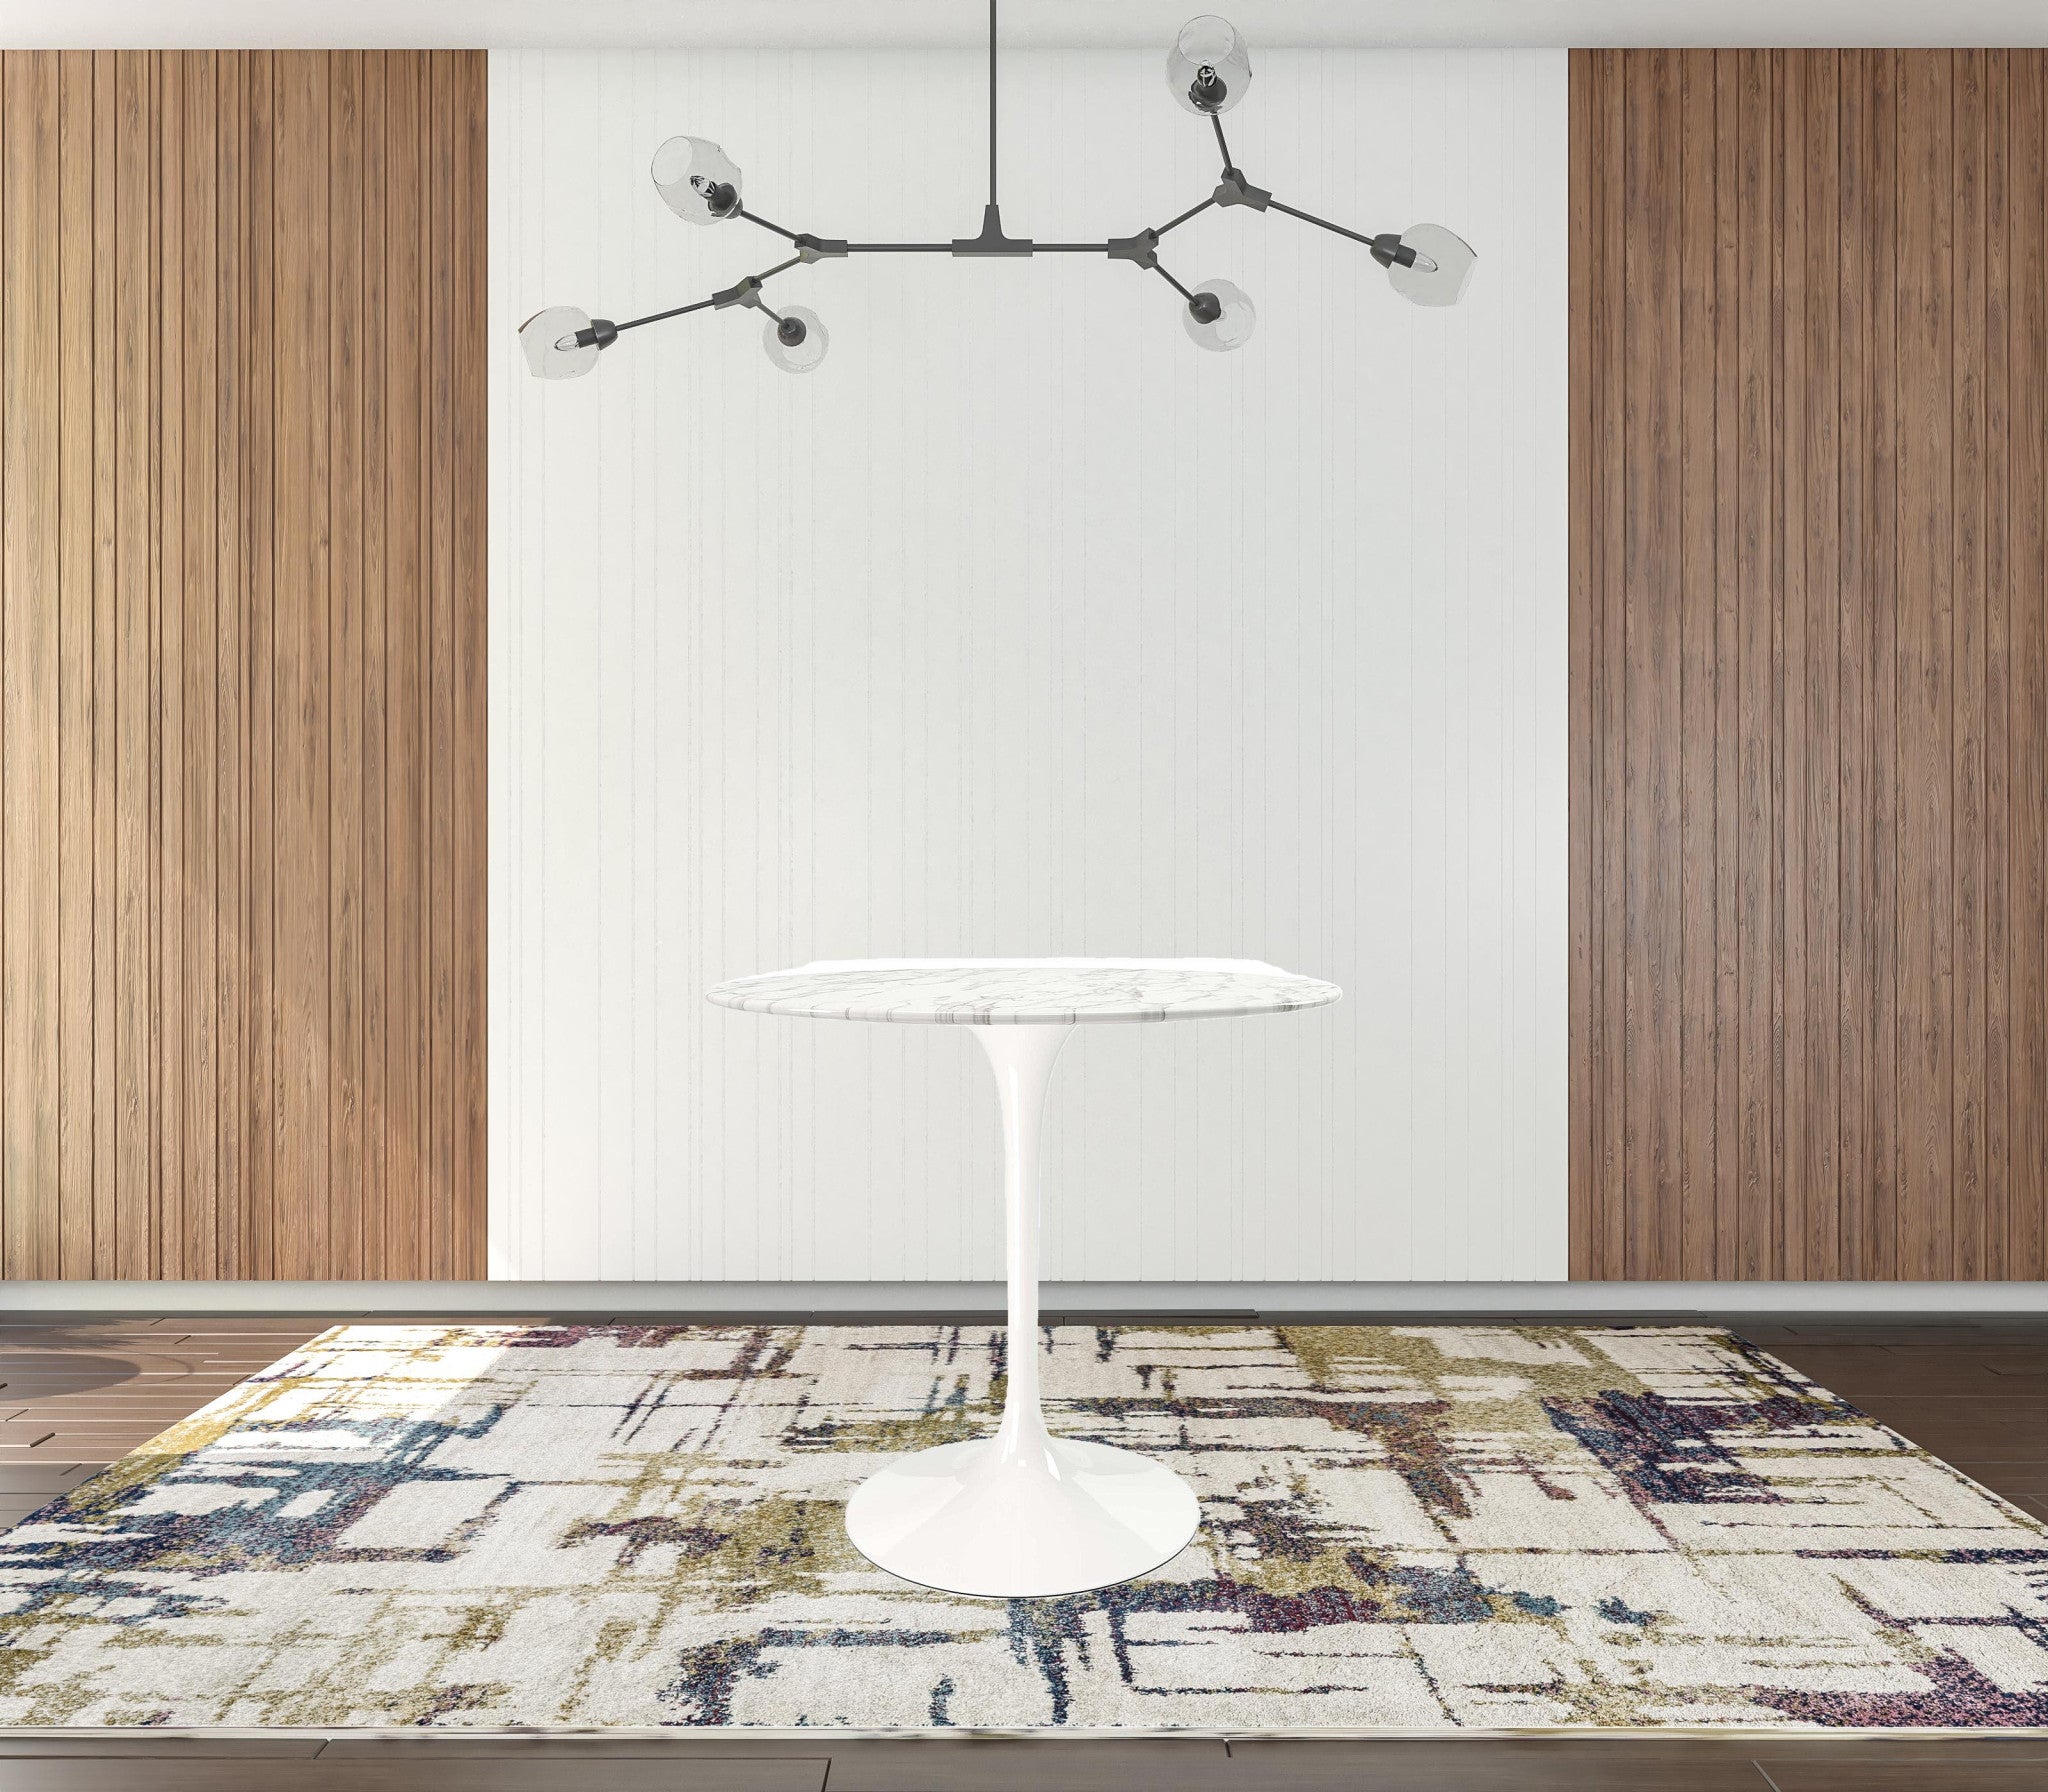 32" White Marble And Metal Dining Table